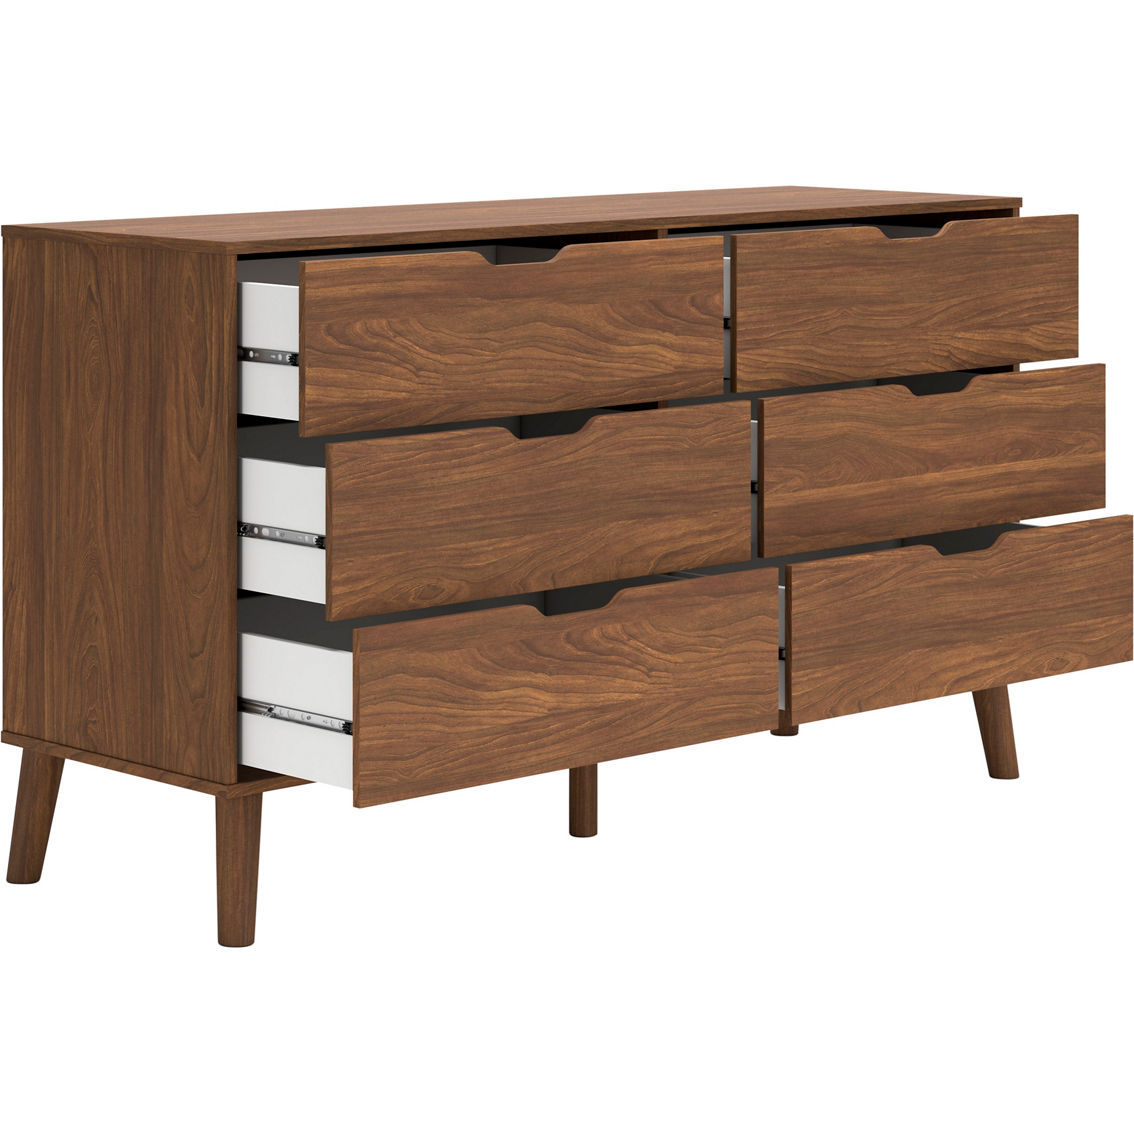 Signature Design by Ashley Fordmont Ready-to-Assemble Dresser - Image 4 of 8